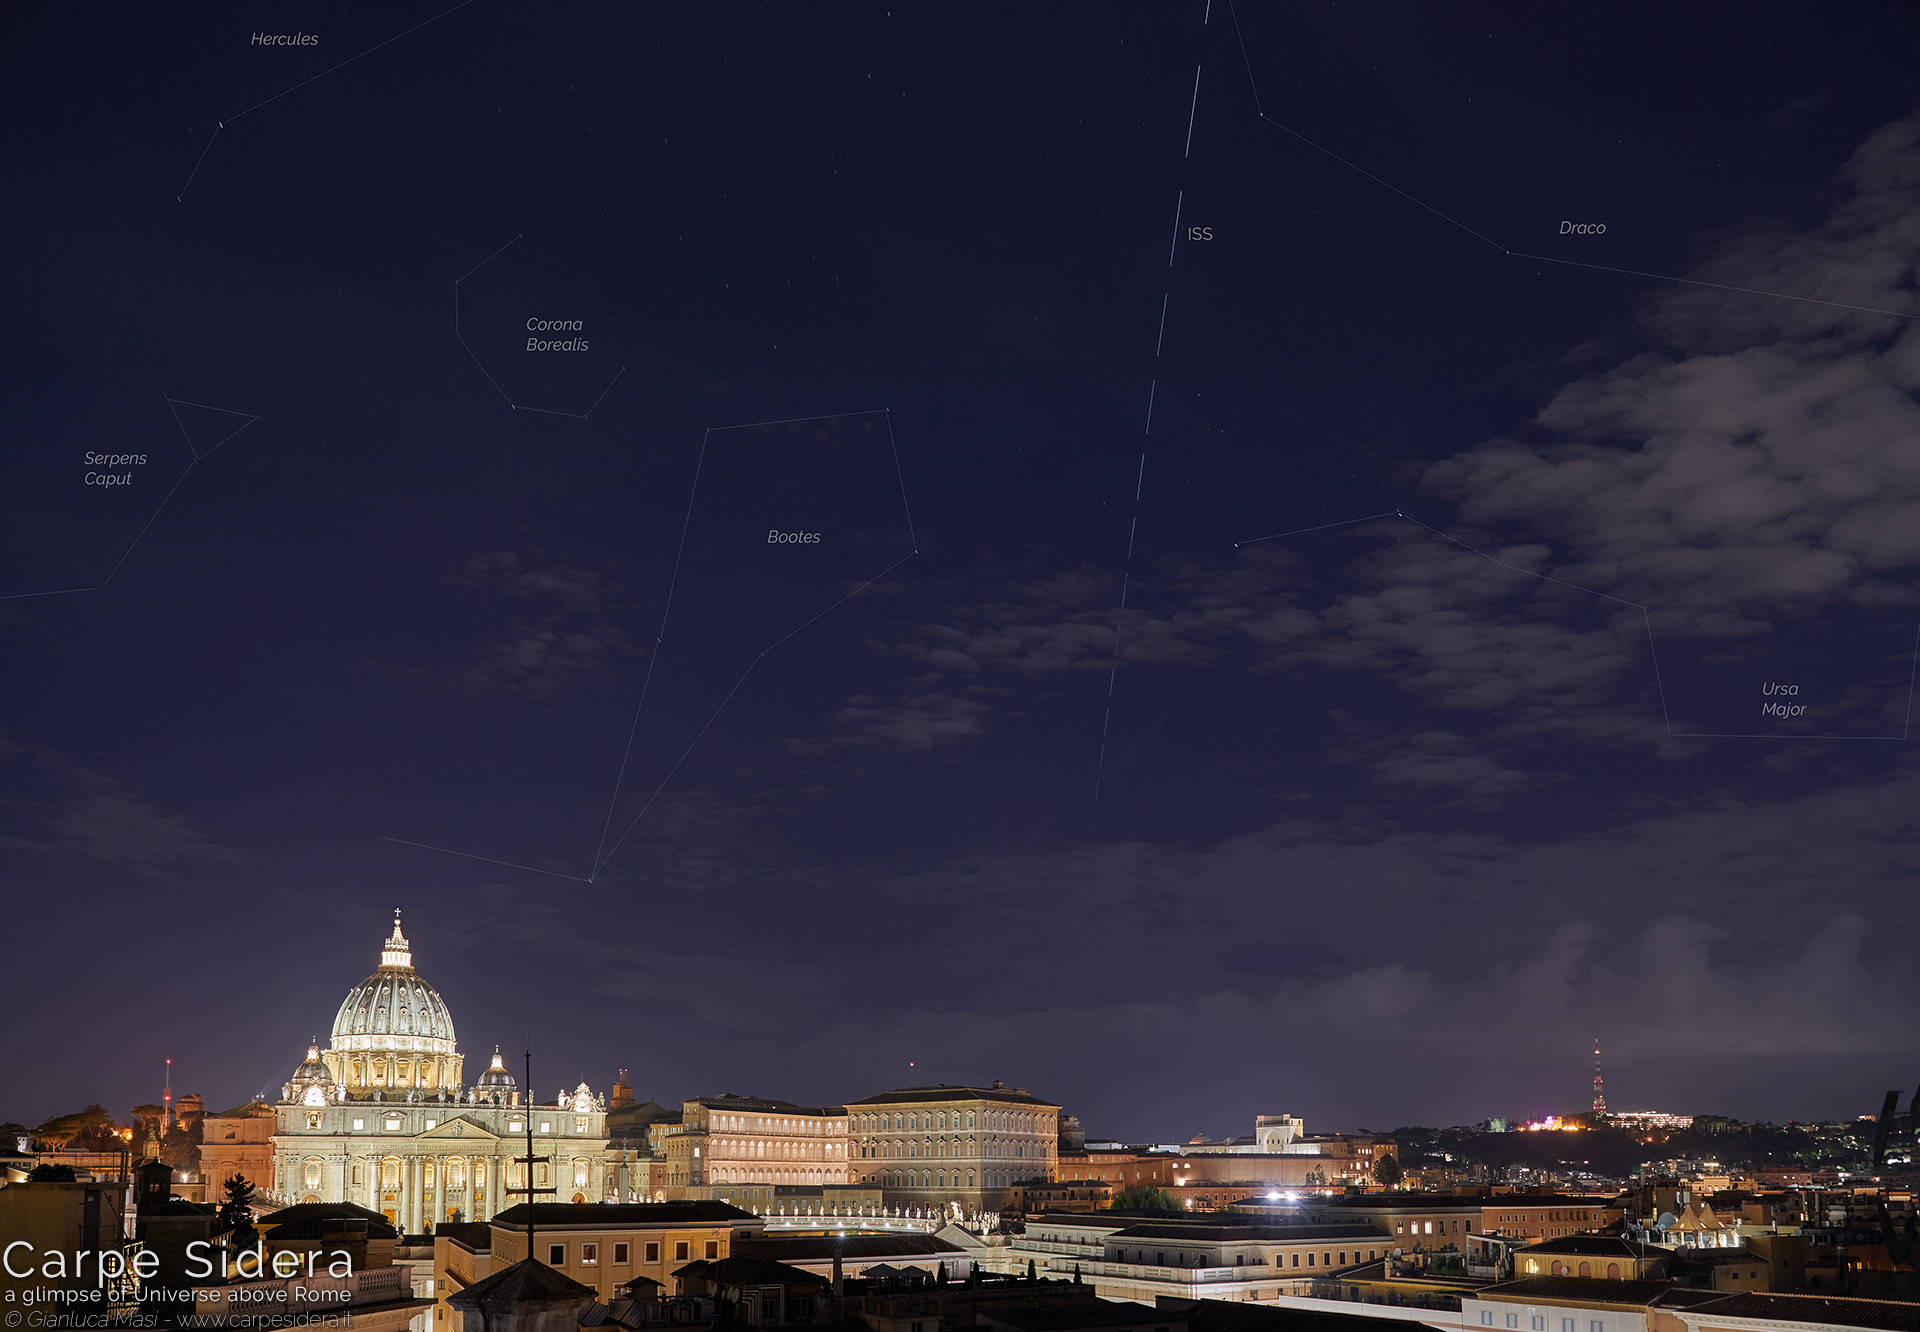 21. The International Space Station (ISS) passes above the St. Peter's Basilica.